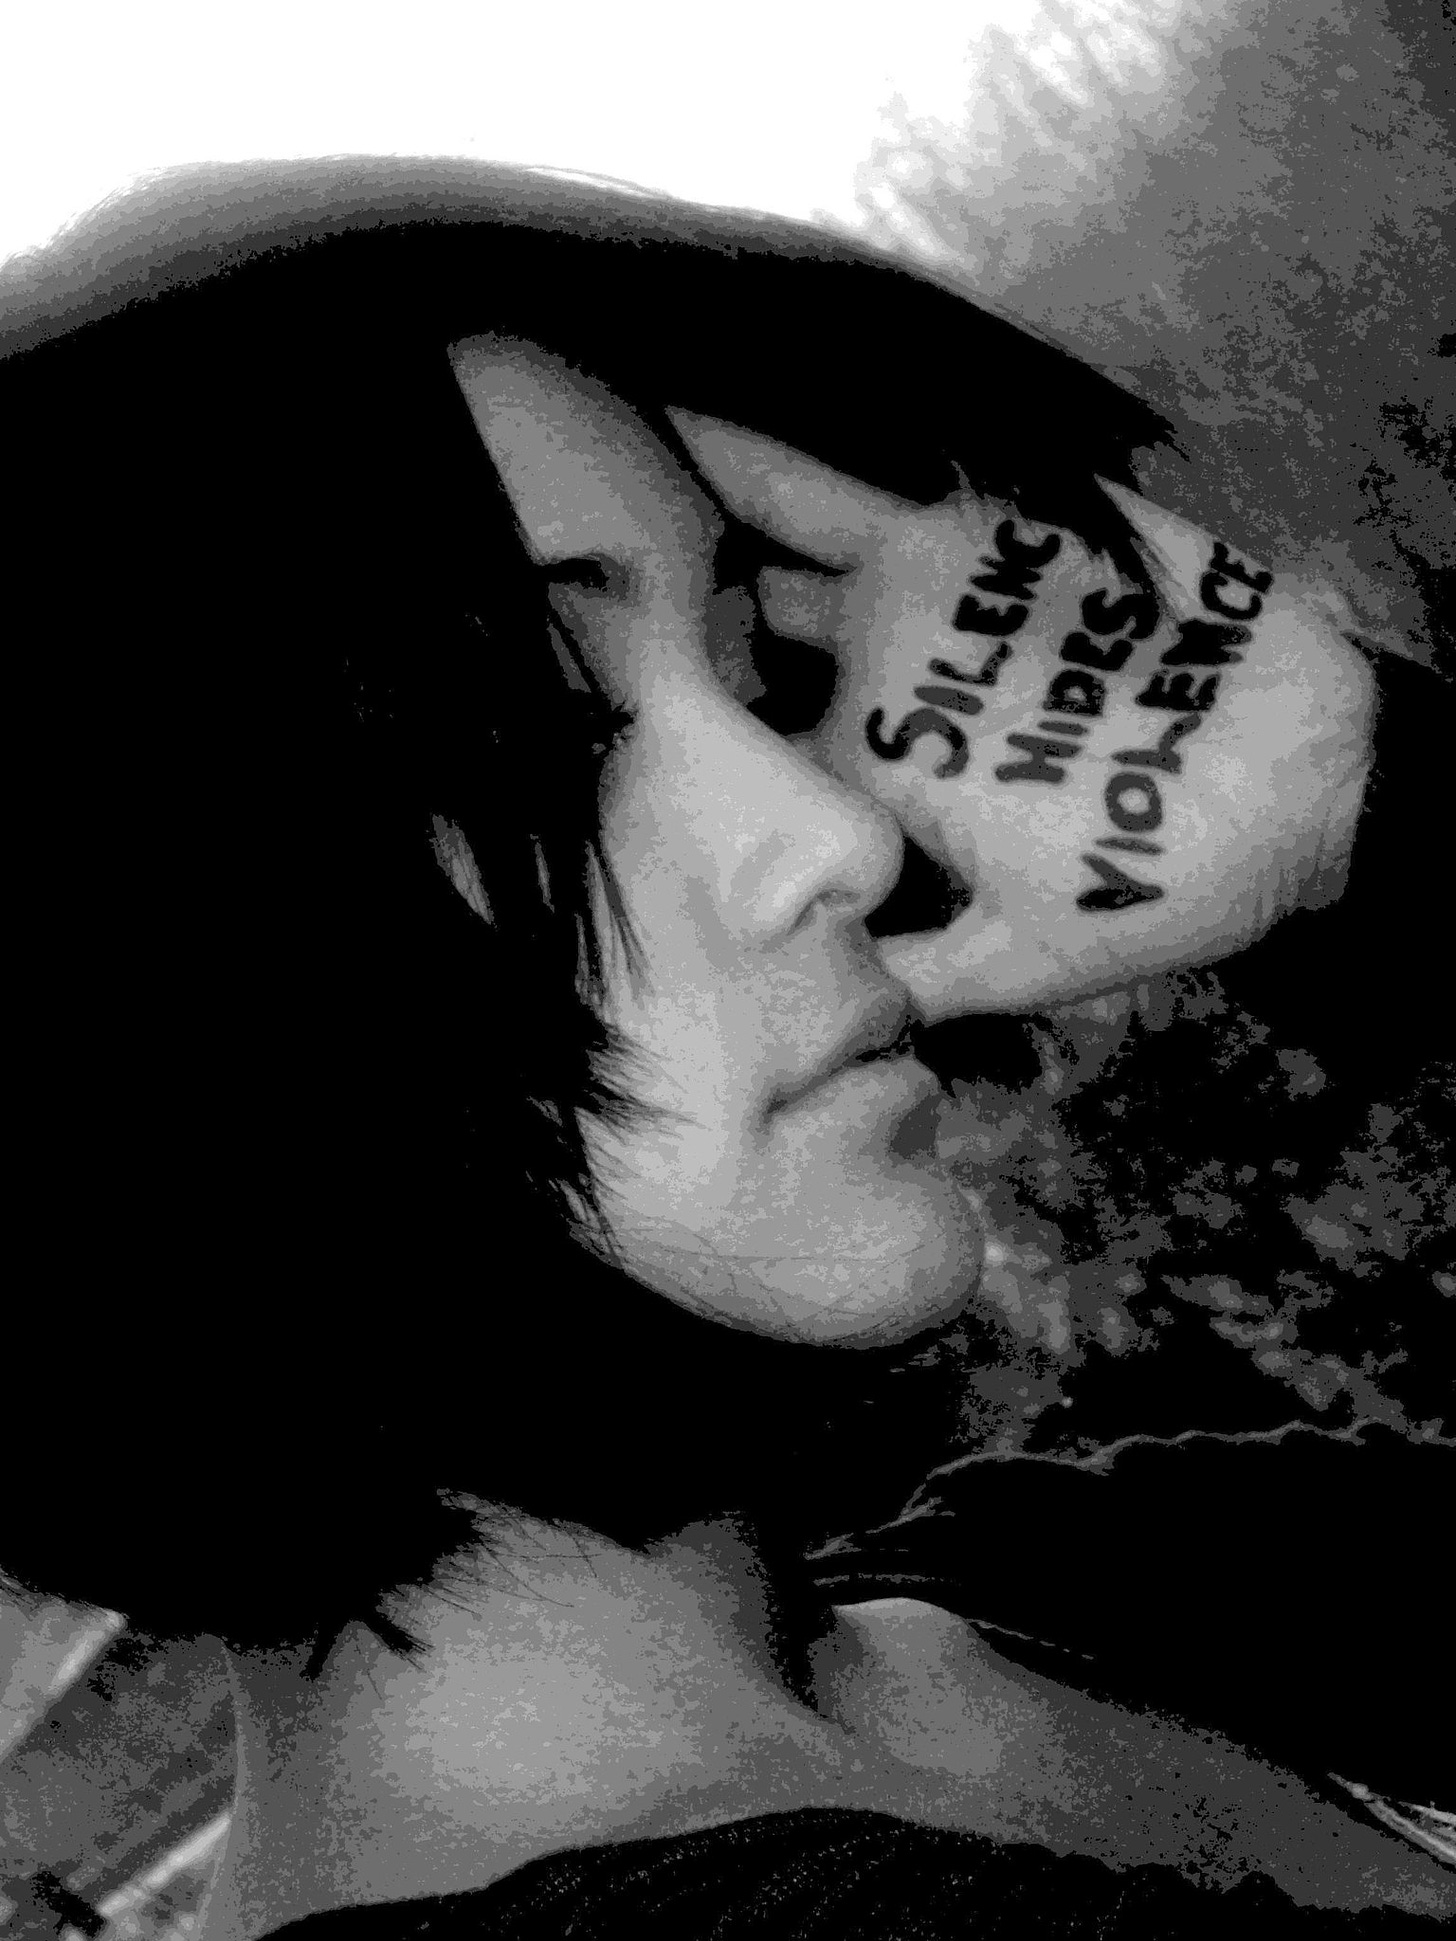 Young woman with hand to her head and the words "Silence hides violence" written on her palm